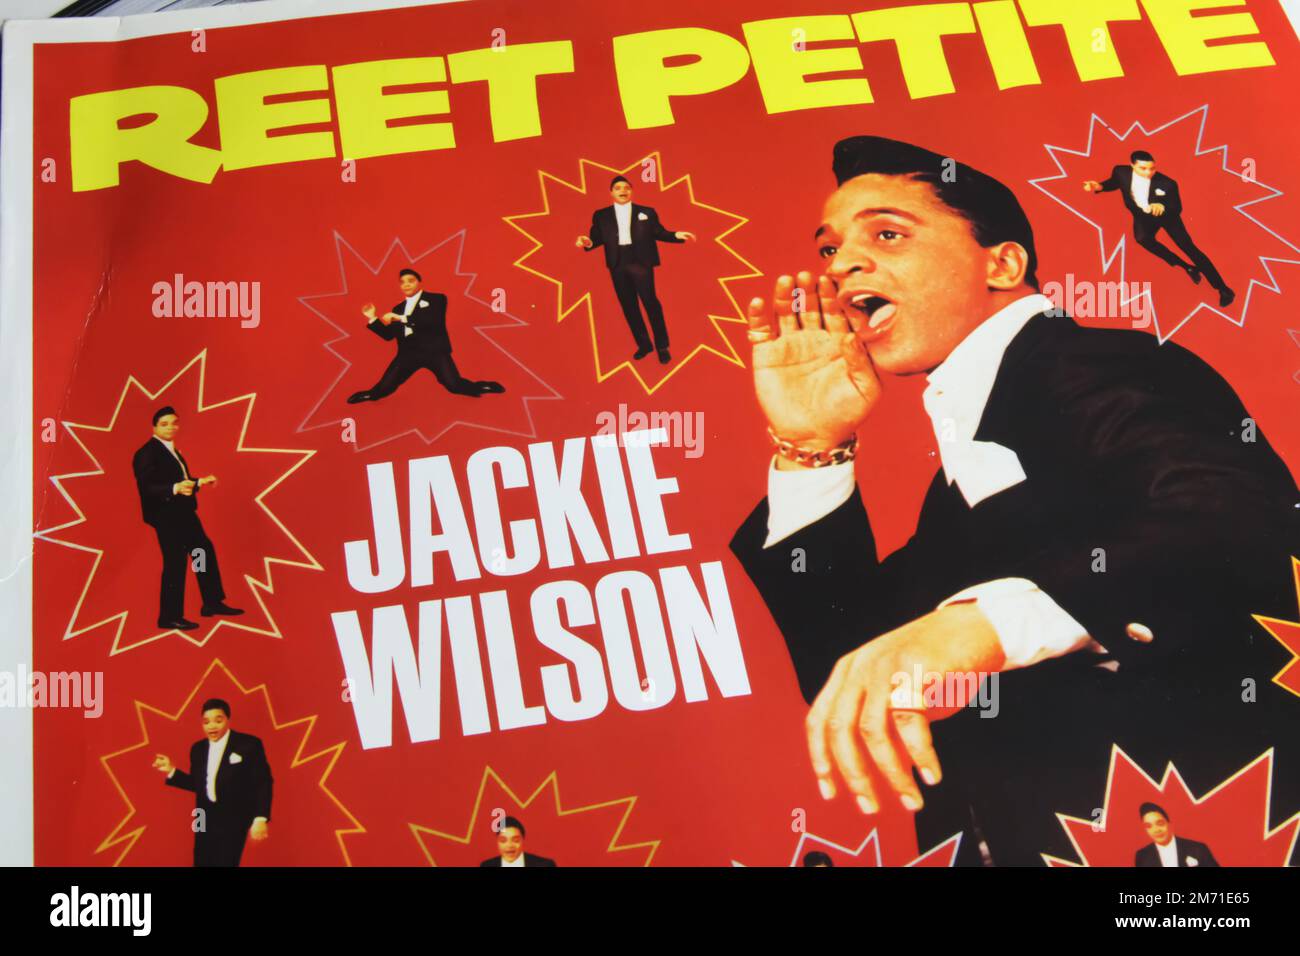 Viersen, Germany - May 9. 2022: Closeup of singer Jackie Wilson vinyl record cover Reet Petite from the 50s Stock Photo